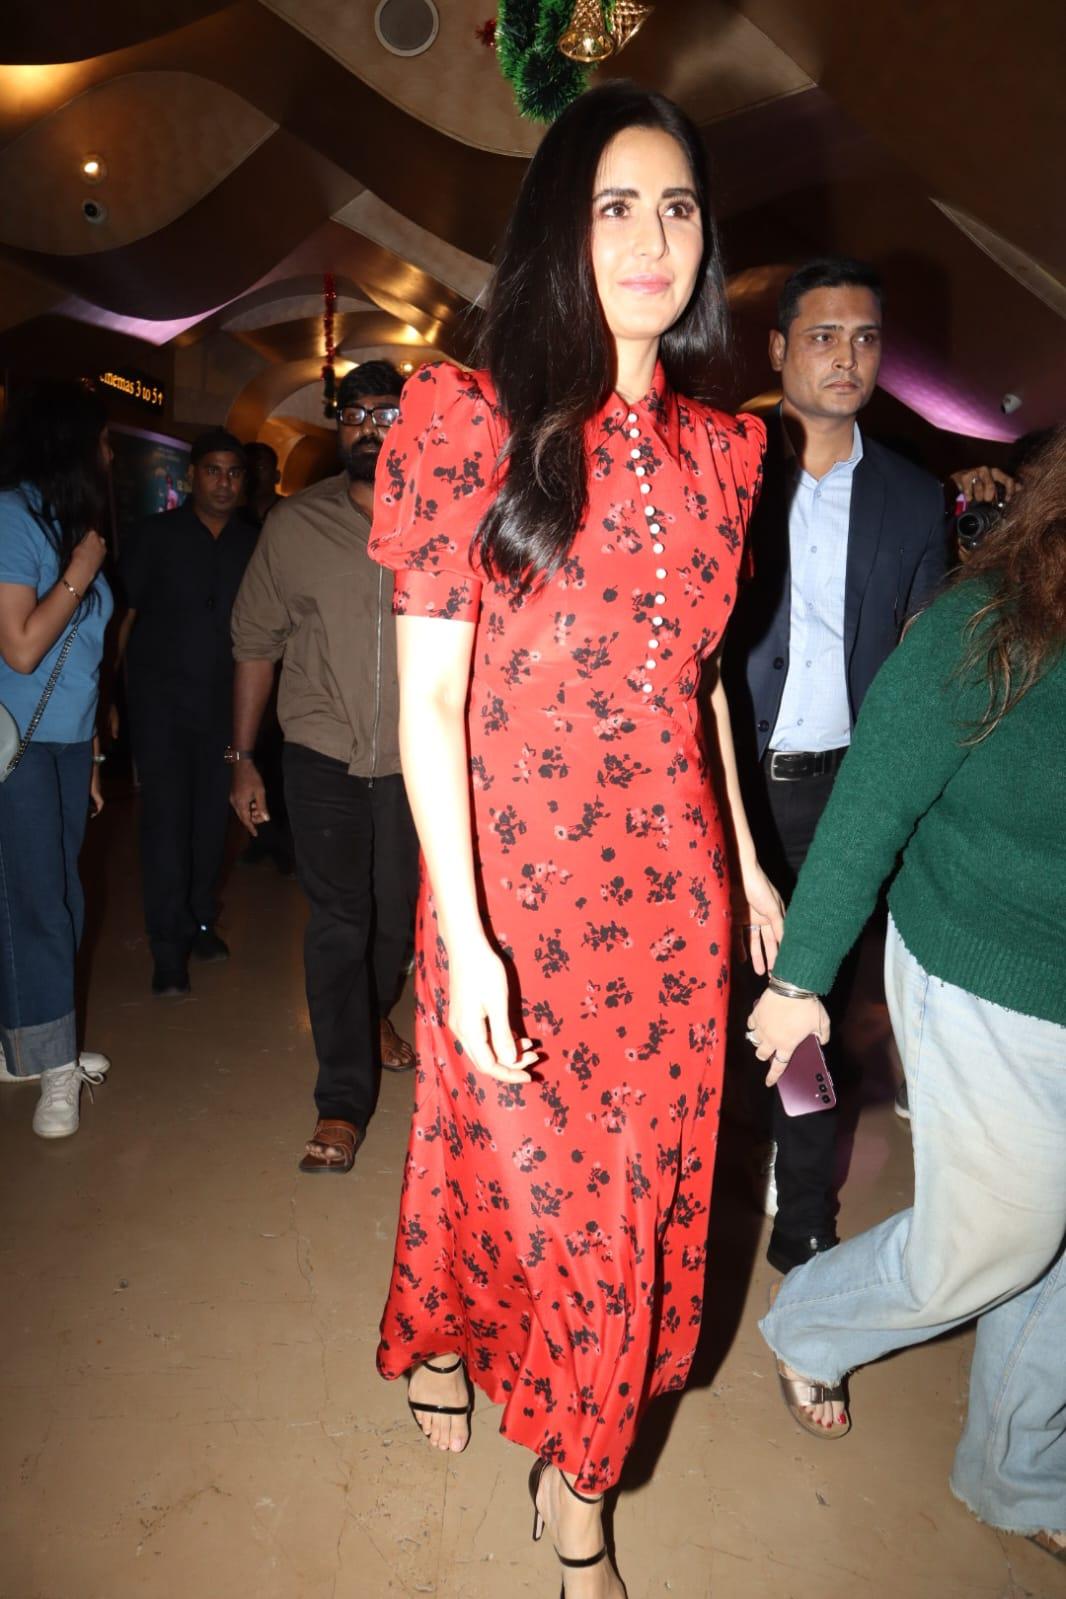 Actress Katrina Kaif dressed in a red dress with floral prints, in keeping with her character from the film